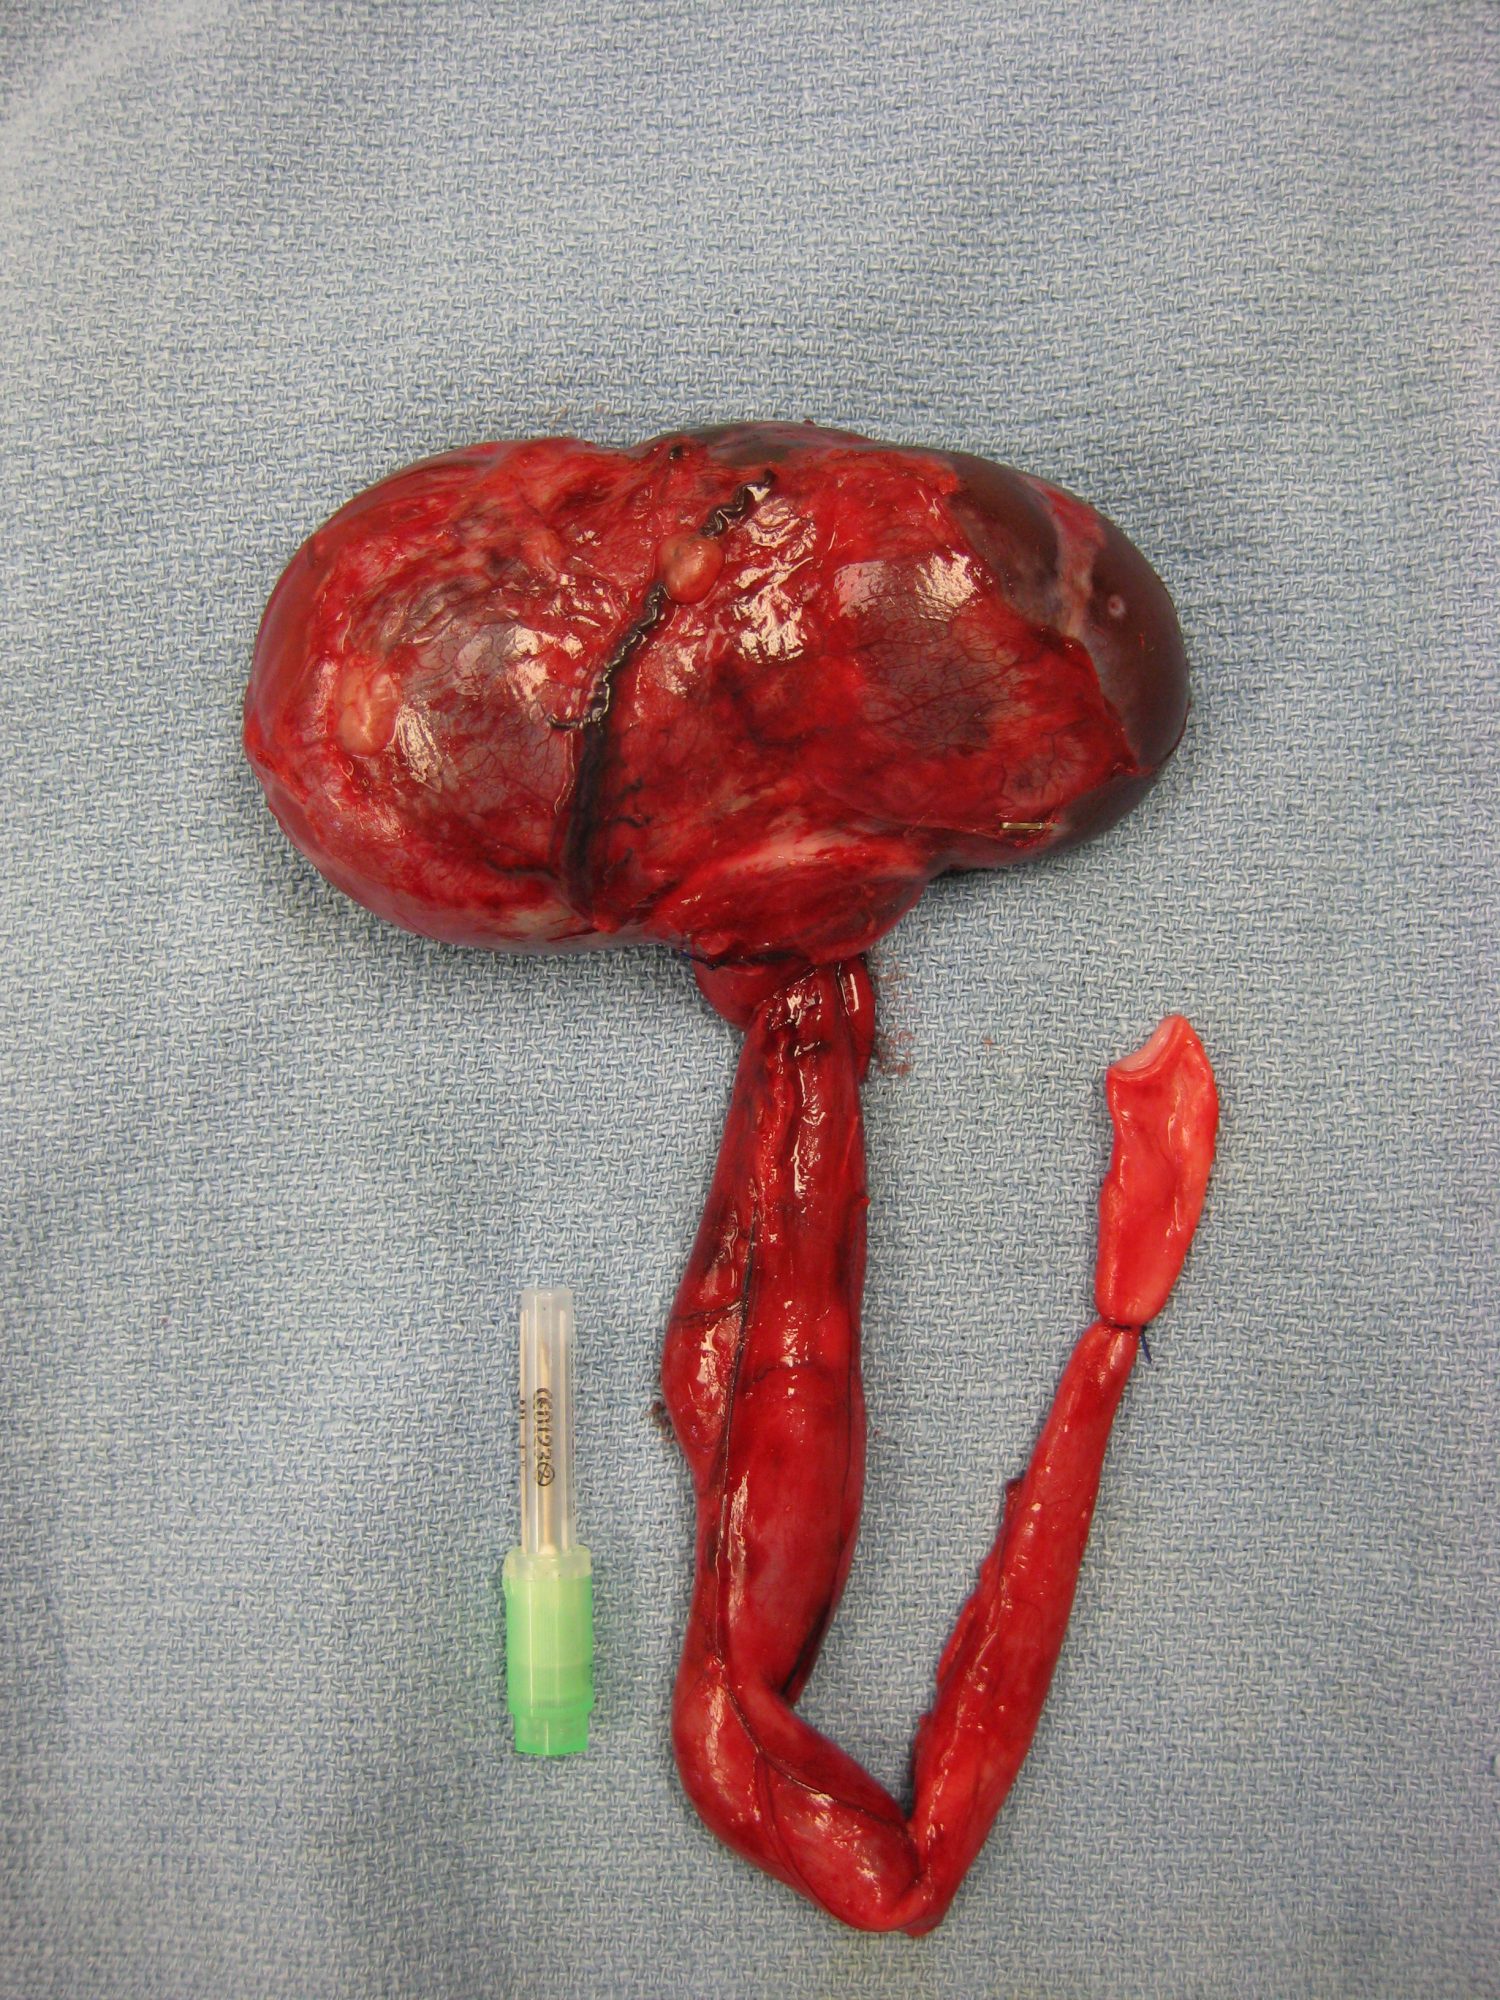 A removed kidney and ureter